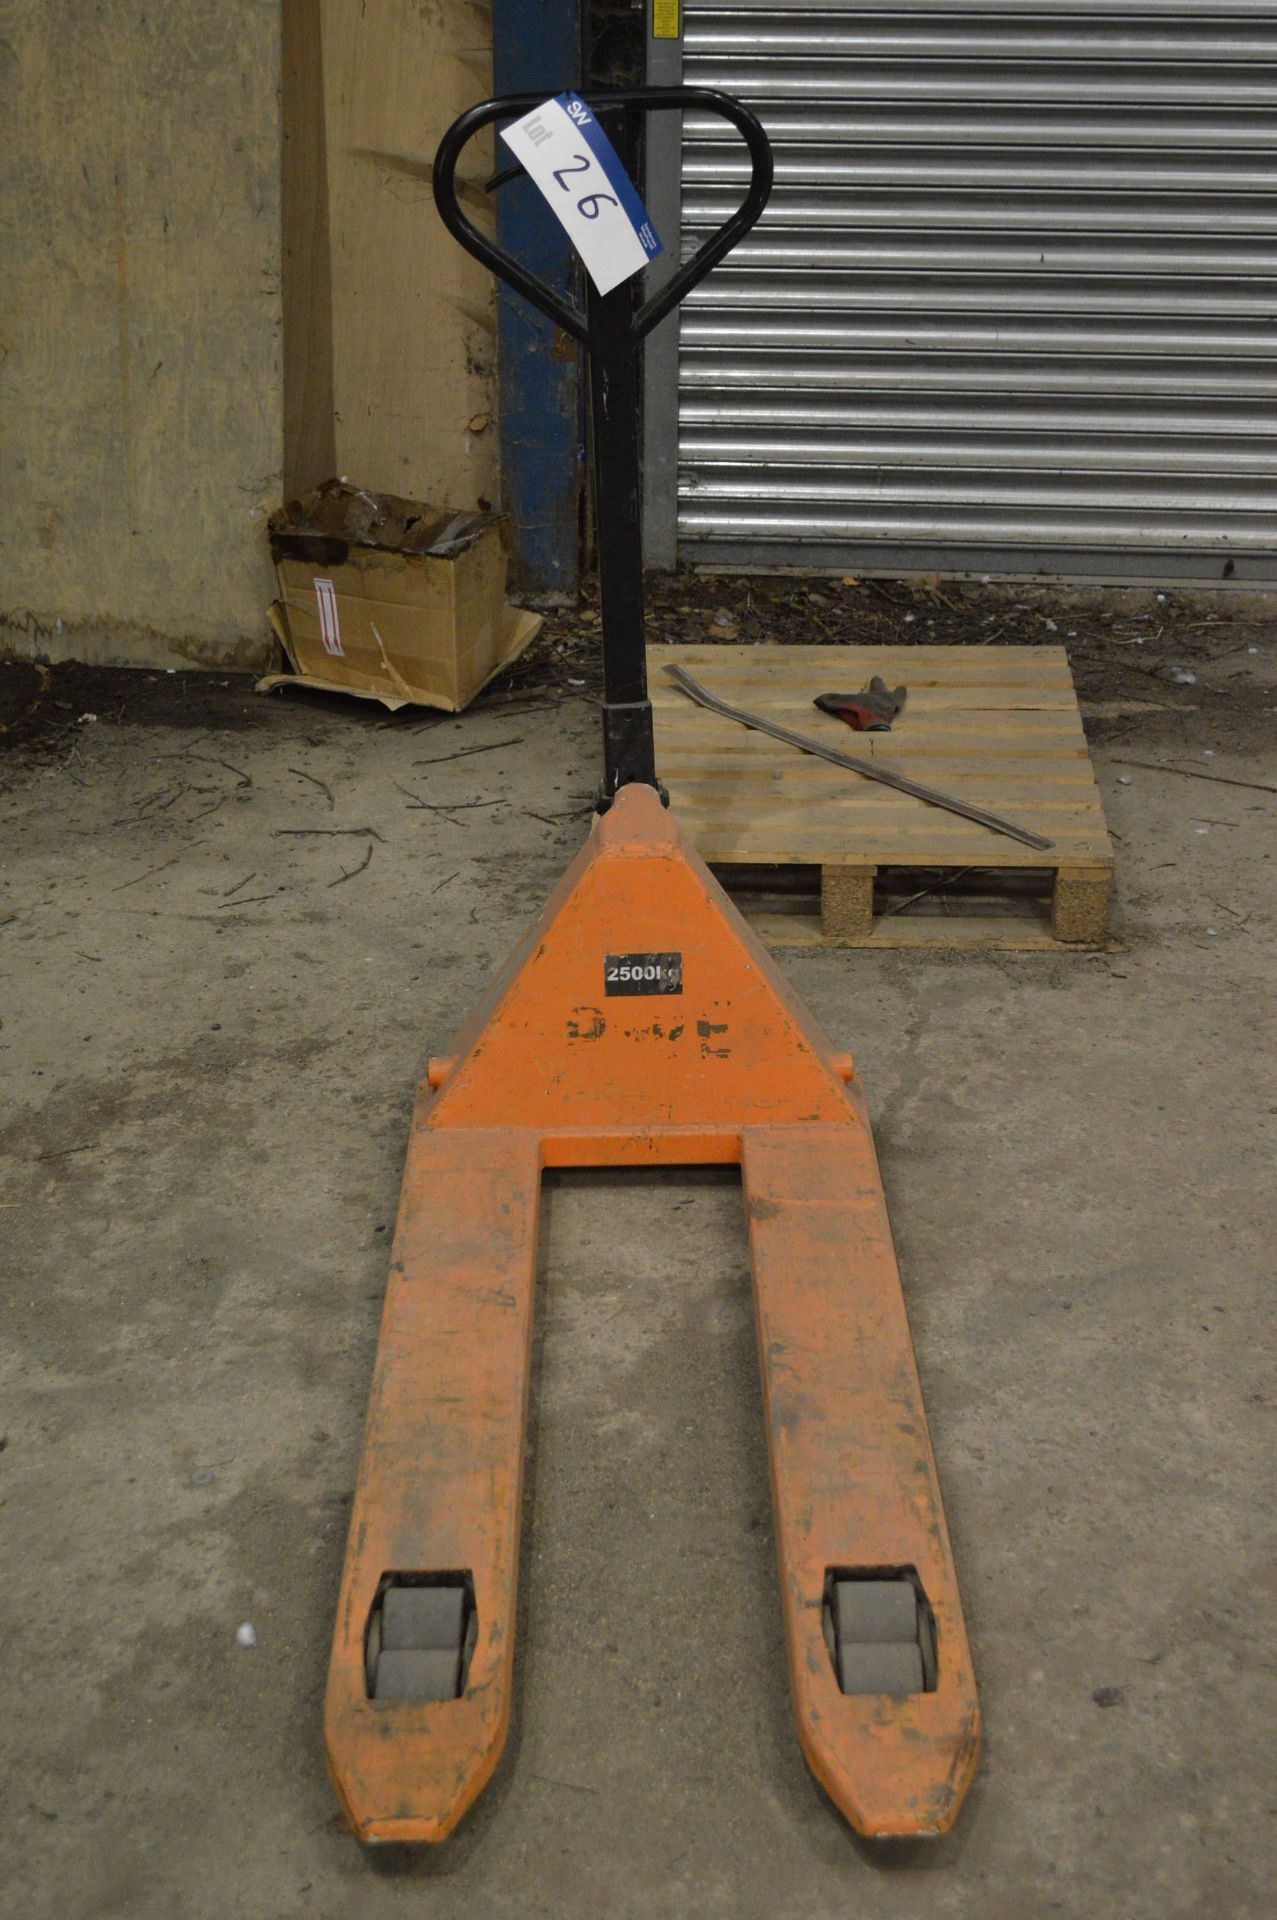 2500kg Hand Hydraulic Pallet Truck - Image 2 of 3